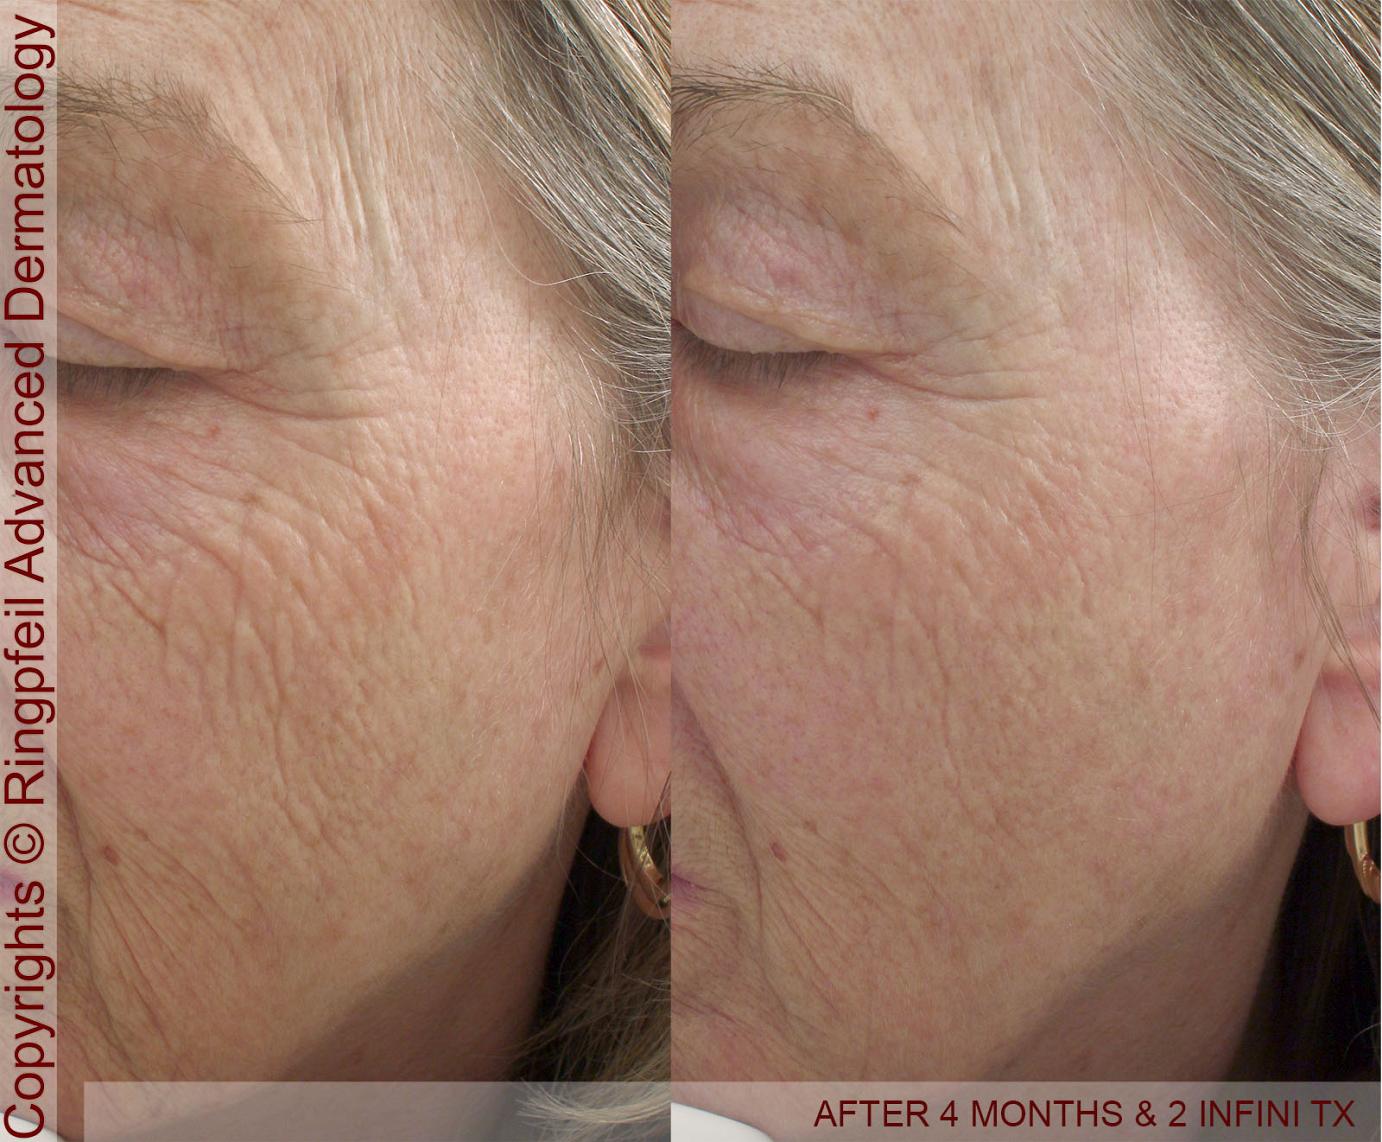 Laser Skin Tightening: What Is It and How Long Does It Last